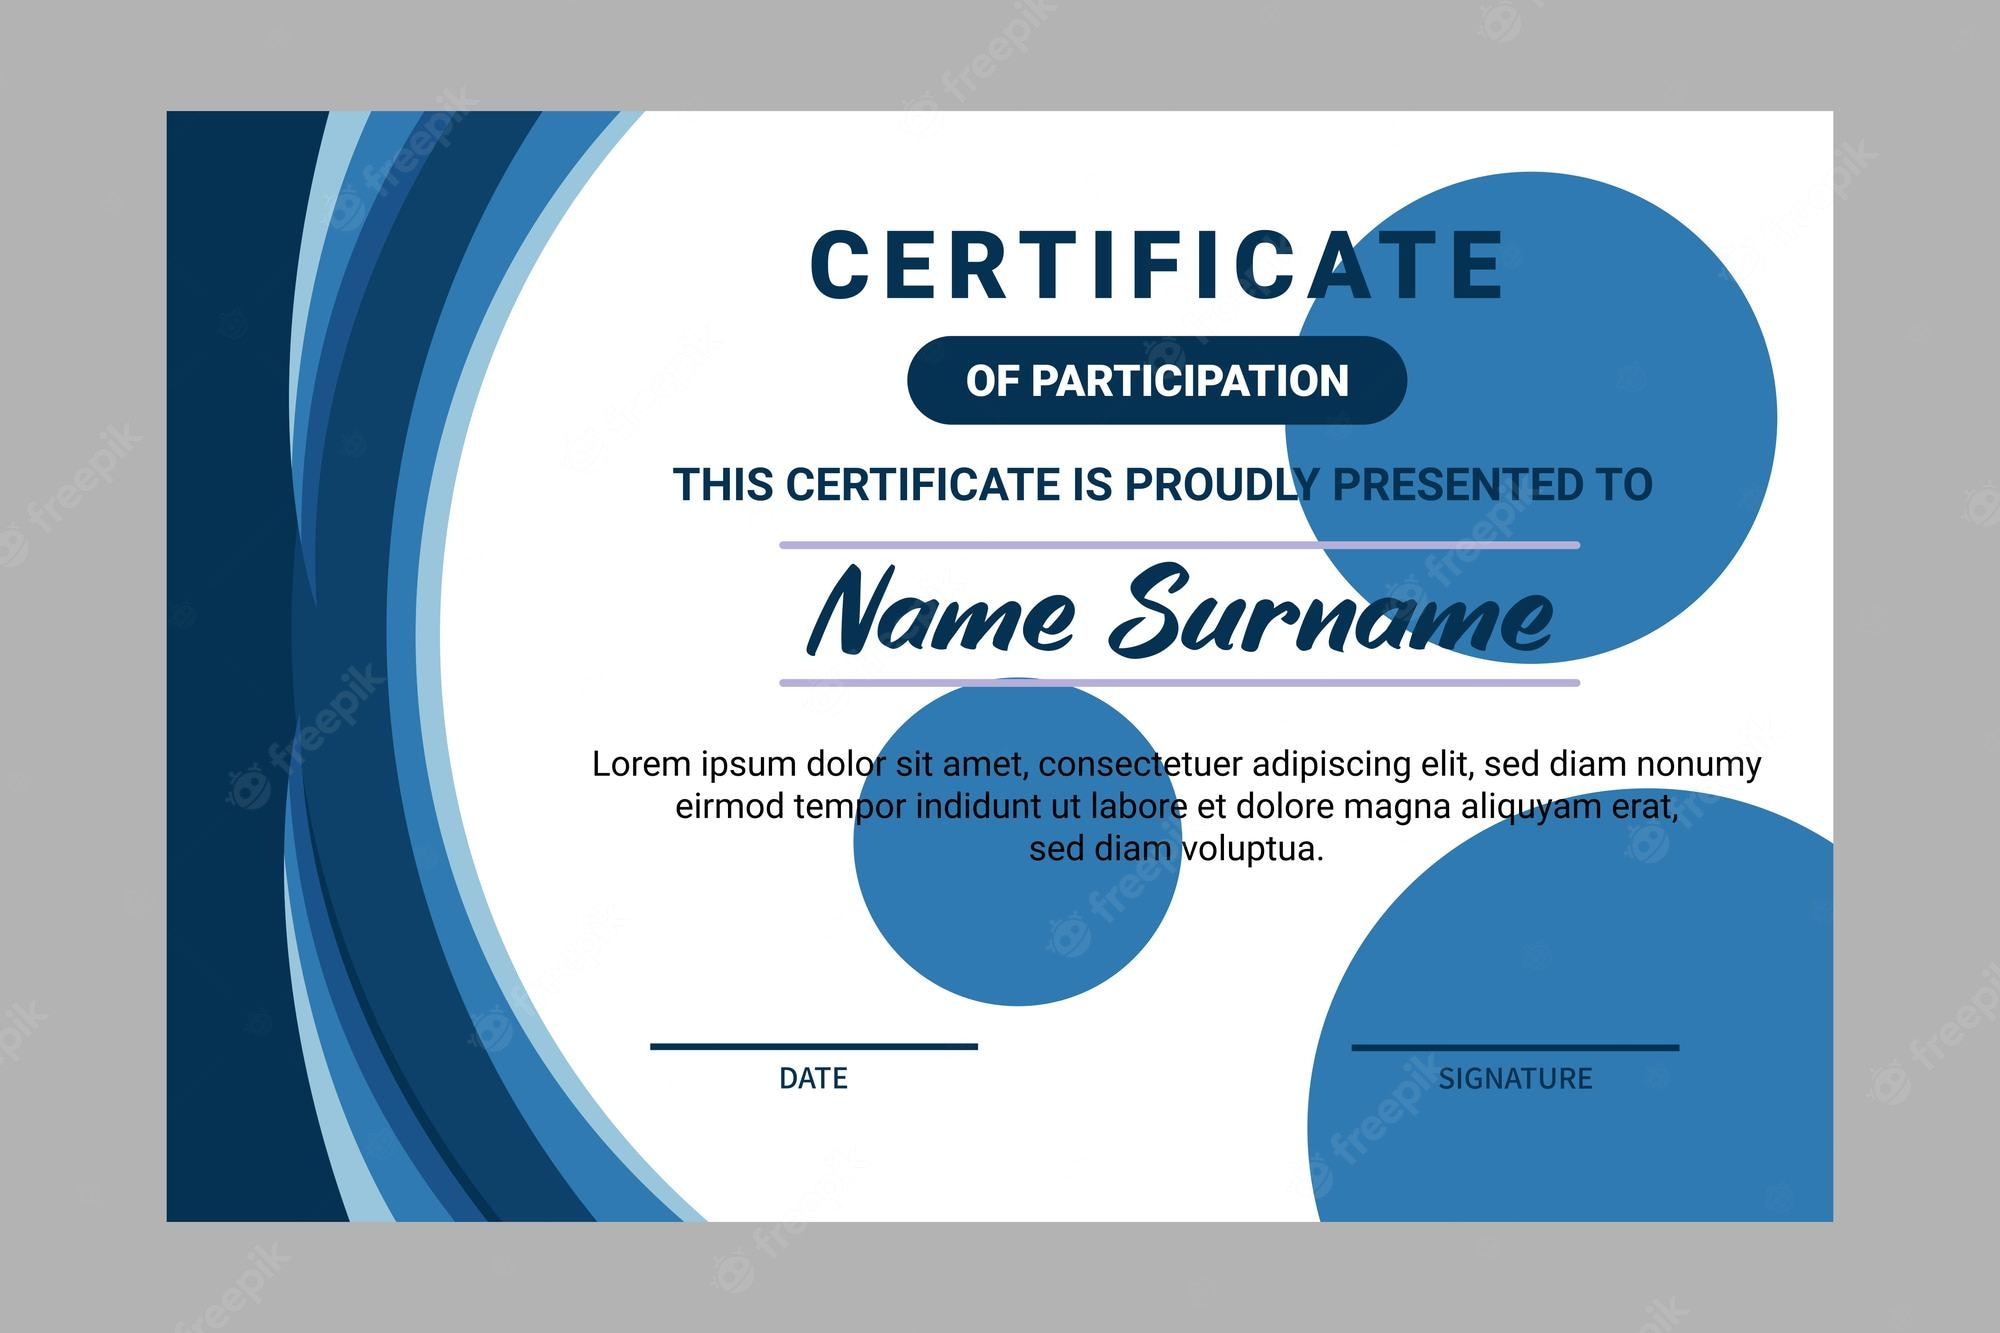 Certificate of participation Vectors & Illustrations for Free  With Regard To Templates For Certificates Of Participation